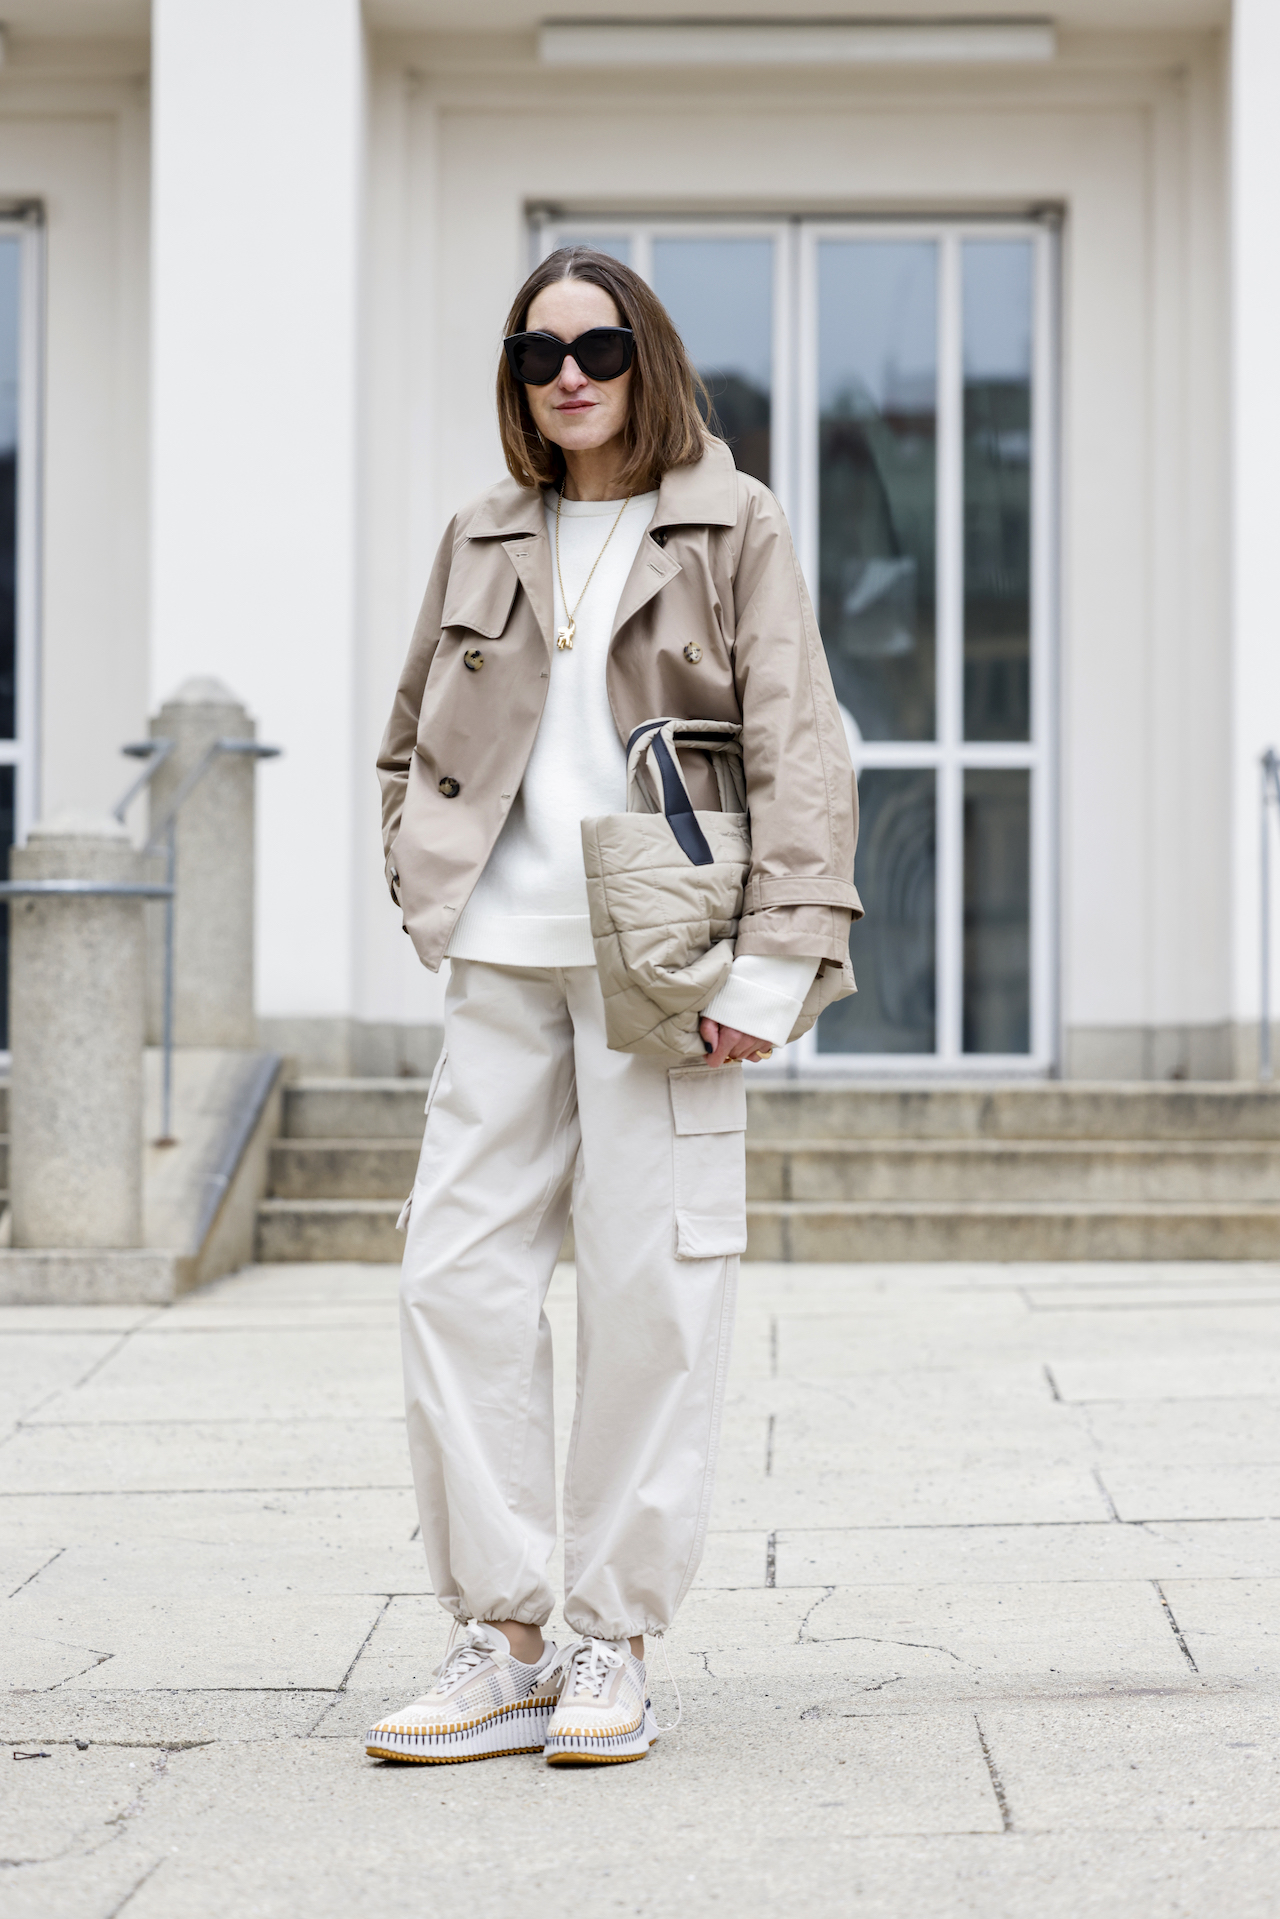 Cargo Trousers Styling, Gallery posted by Modeetchien